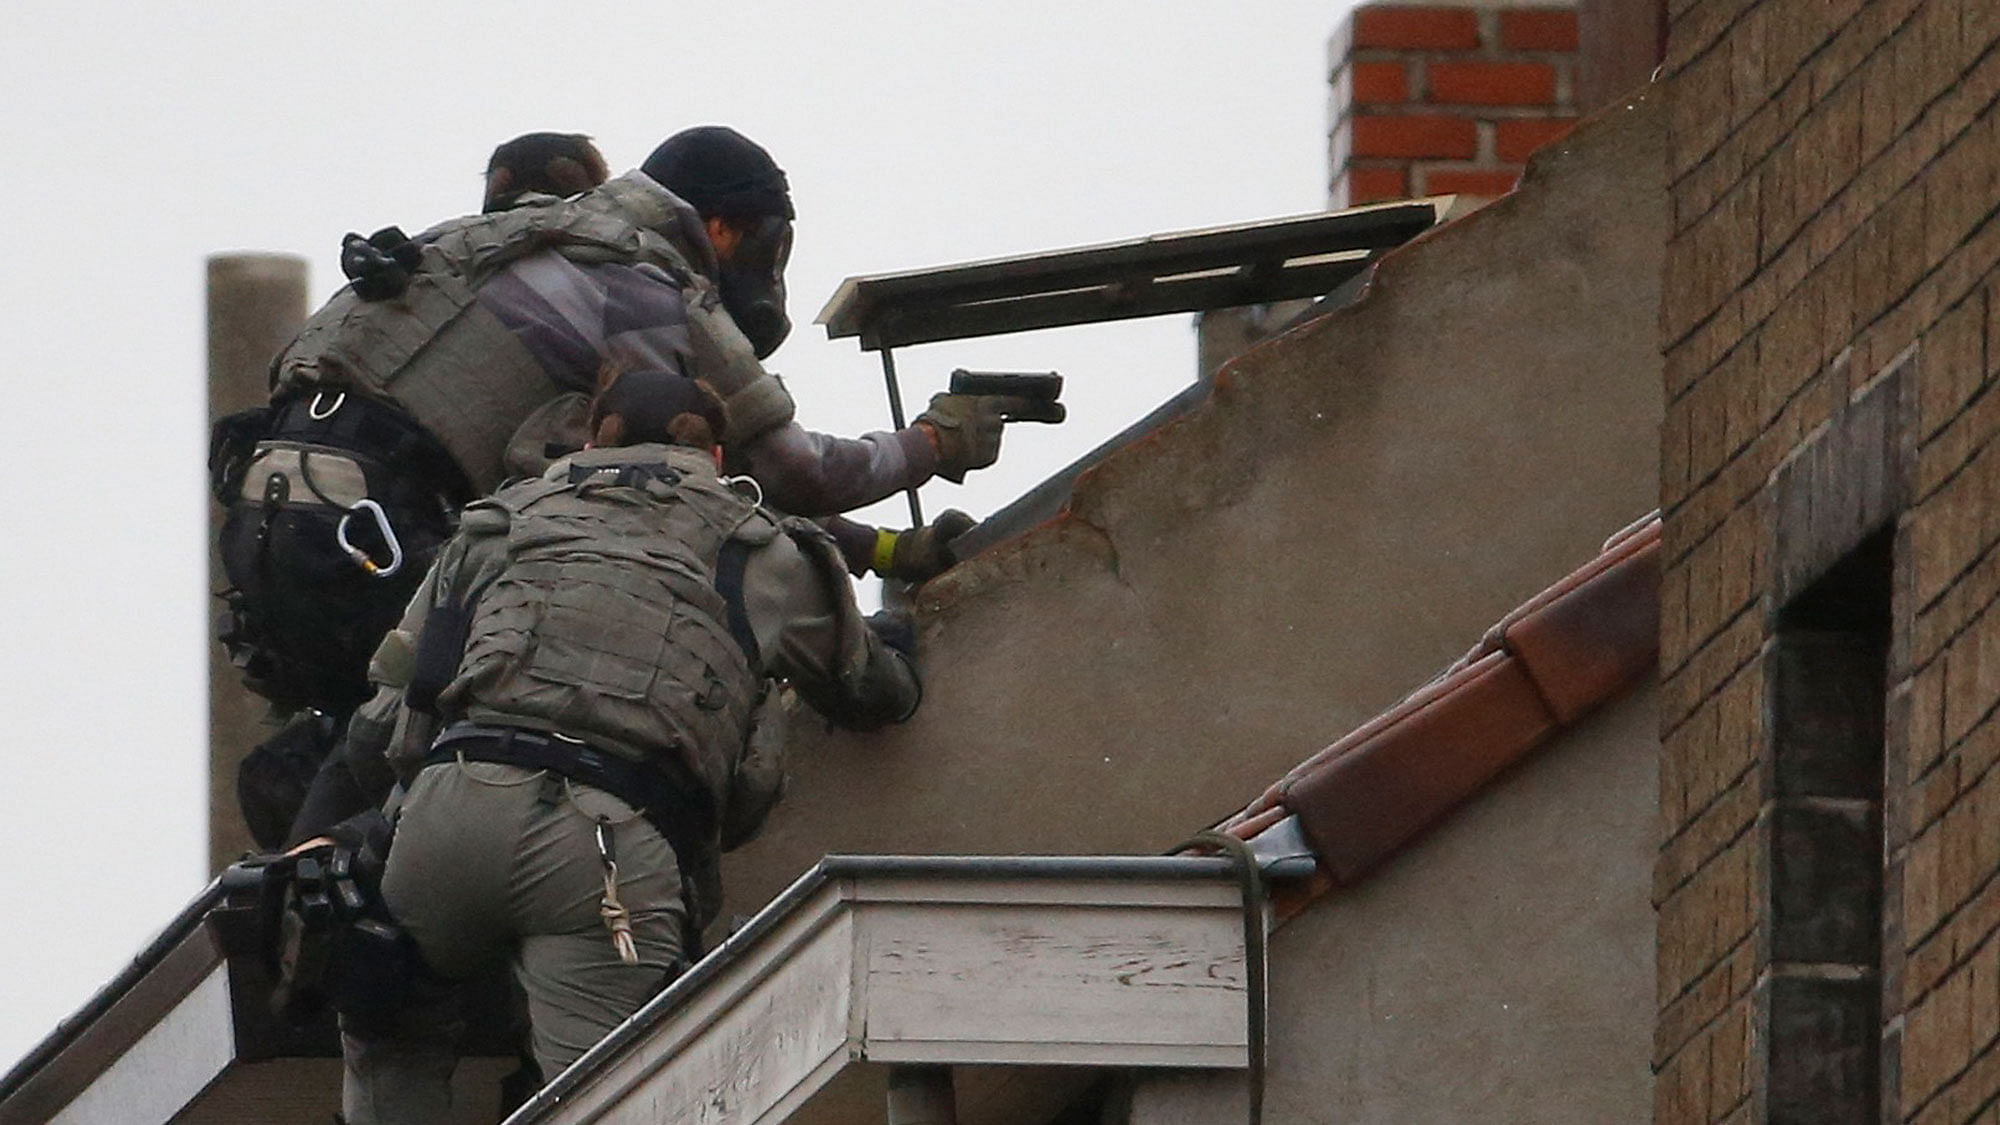 Belgian special forces police climb on a building during a raid in Brussels on November 16, 2015. (Photo: Reuters)